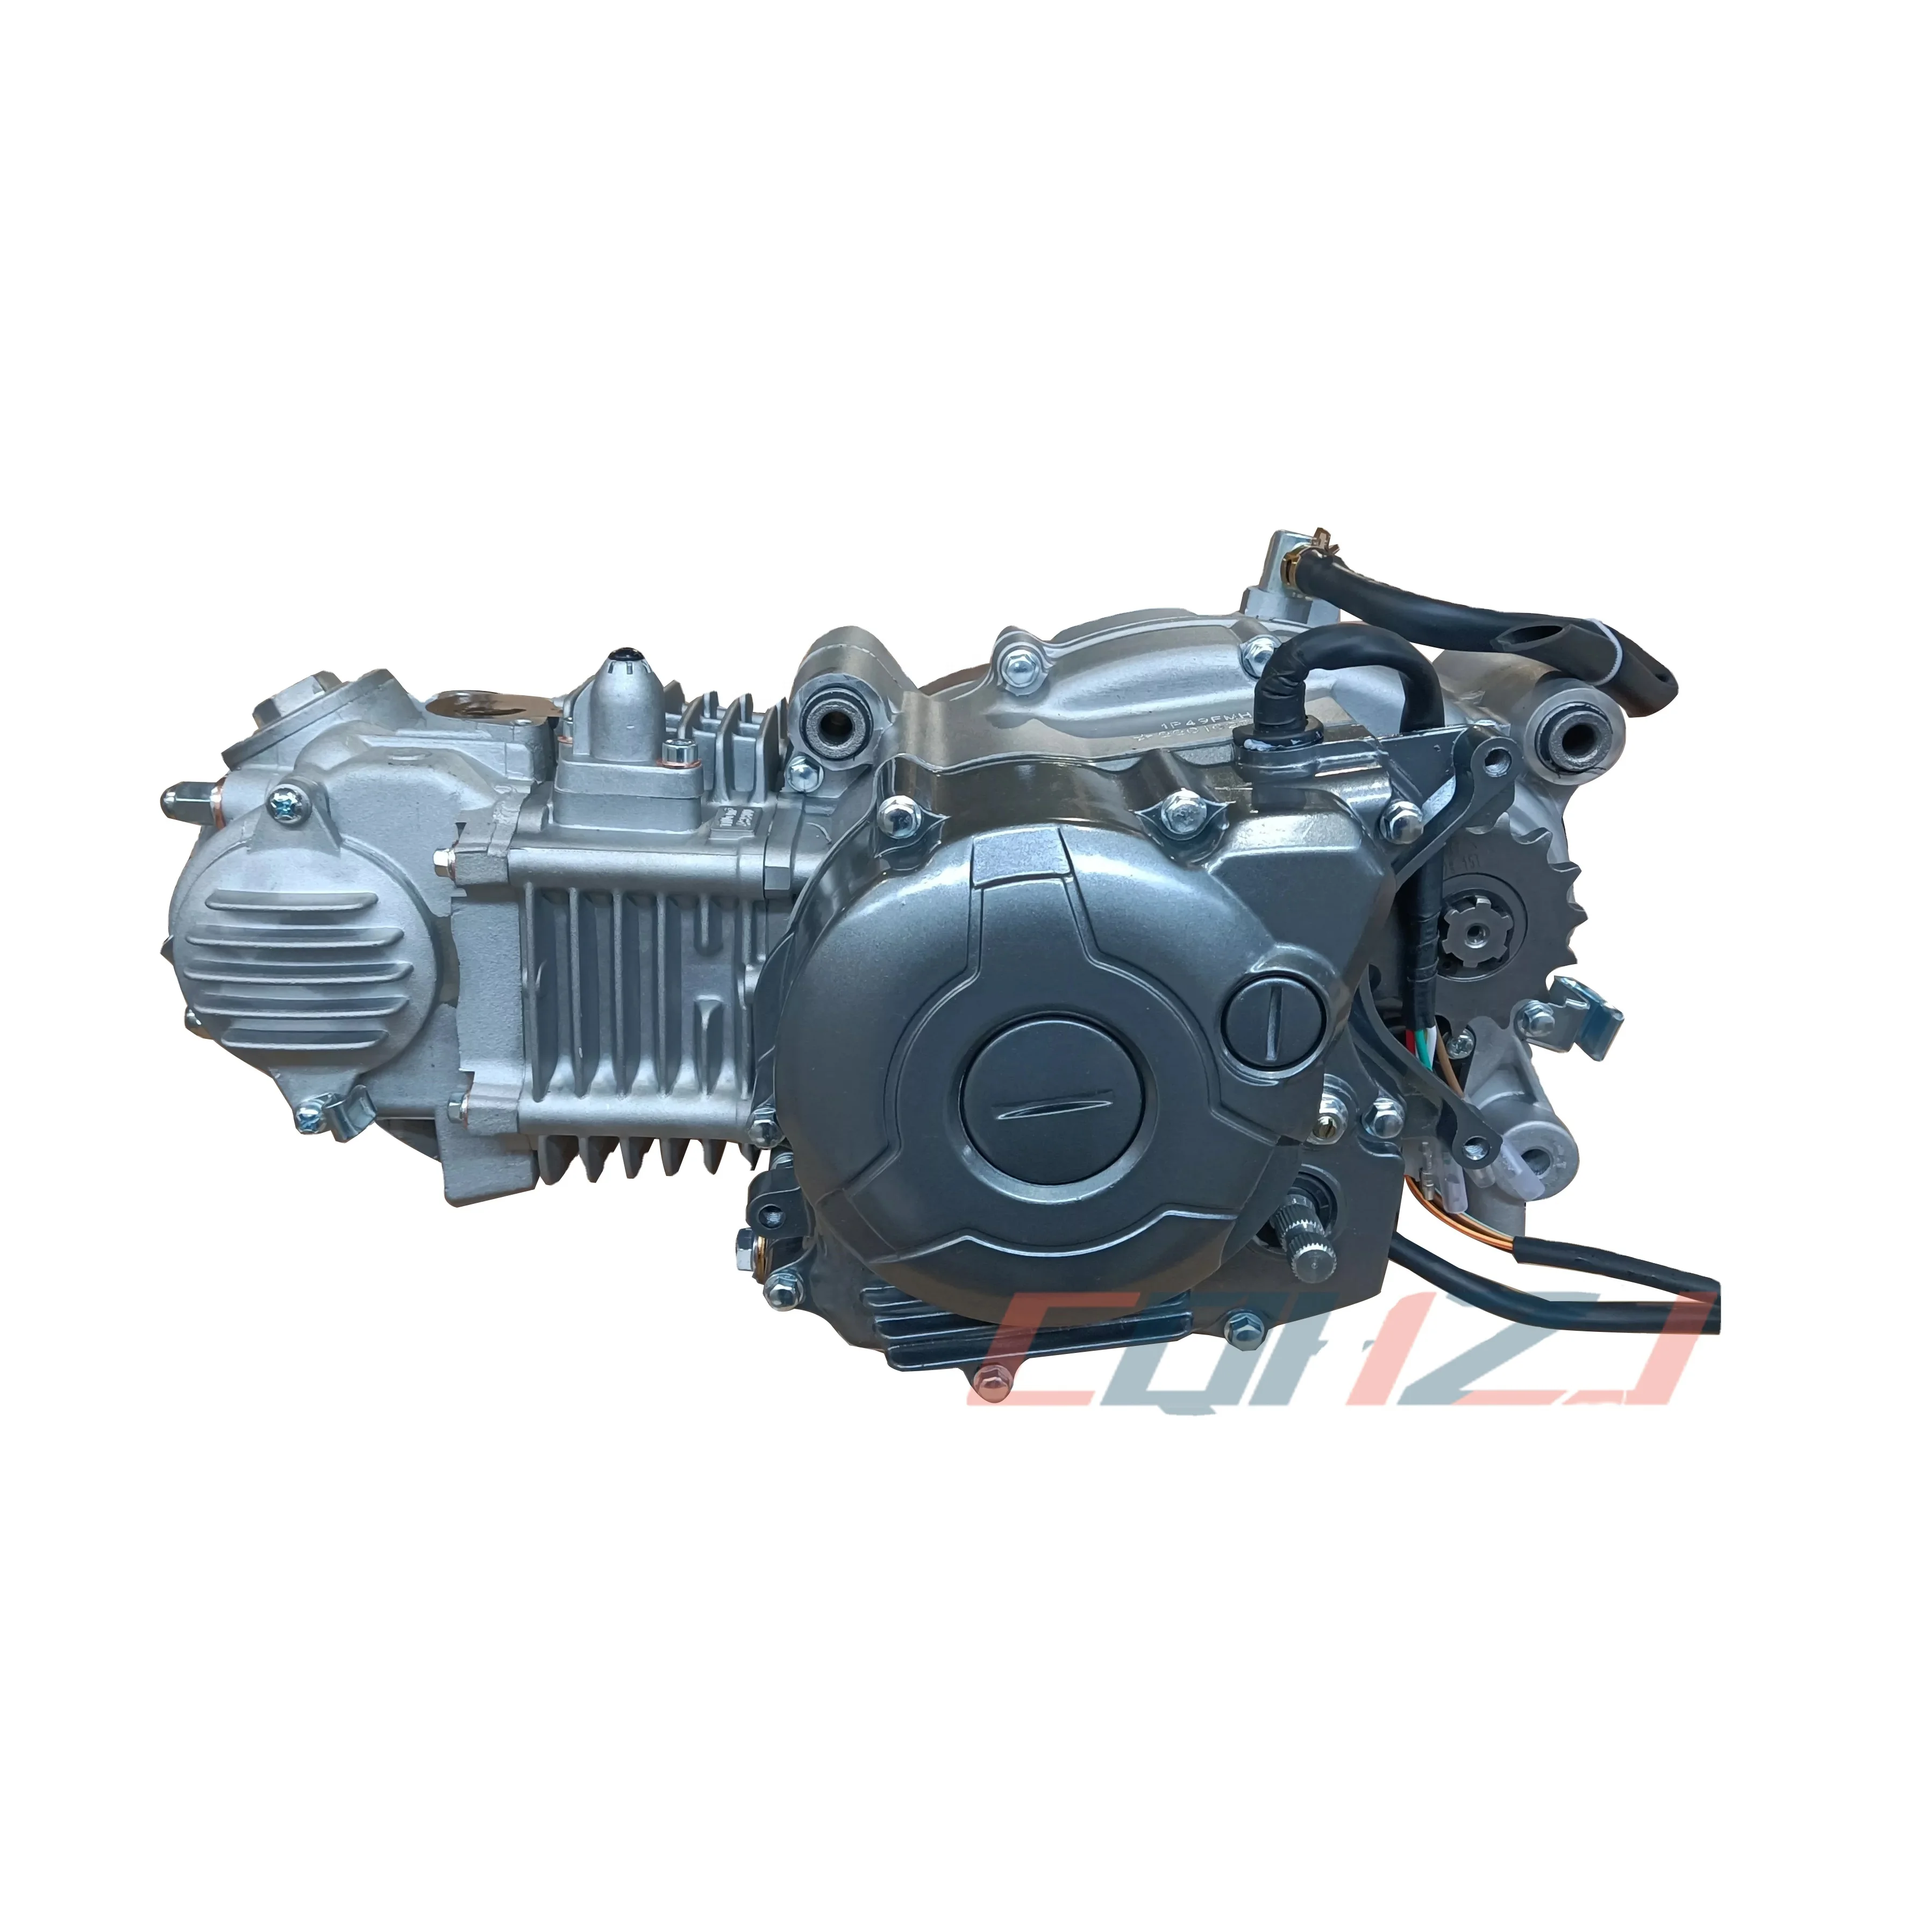 CQHZJ Factory Direct Sale Motorcycle Engines Assembly JY110 YB110 YBR125 YBR150 Air-Cooled Engine factory direct price gasoline motorcycle exhaust systems 150cc motorcycle engine